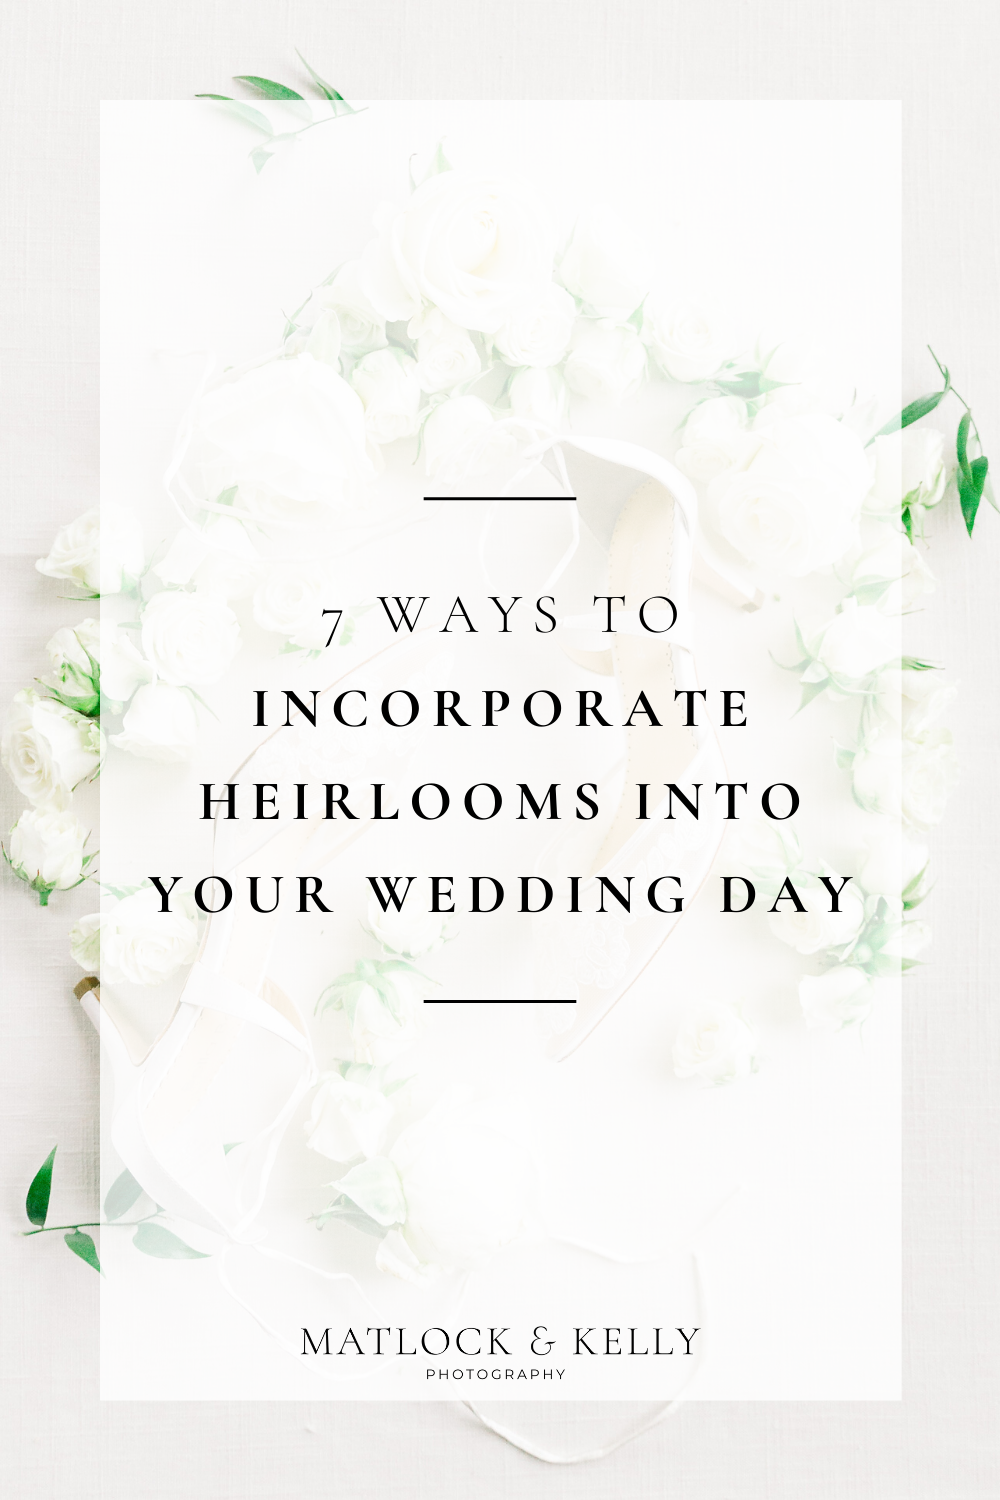 7 unique ways to incorporate heirlooms into your wedding day!